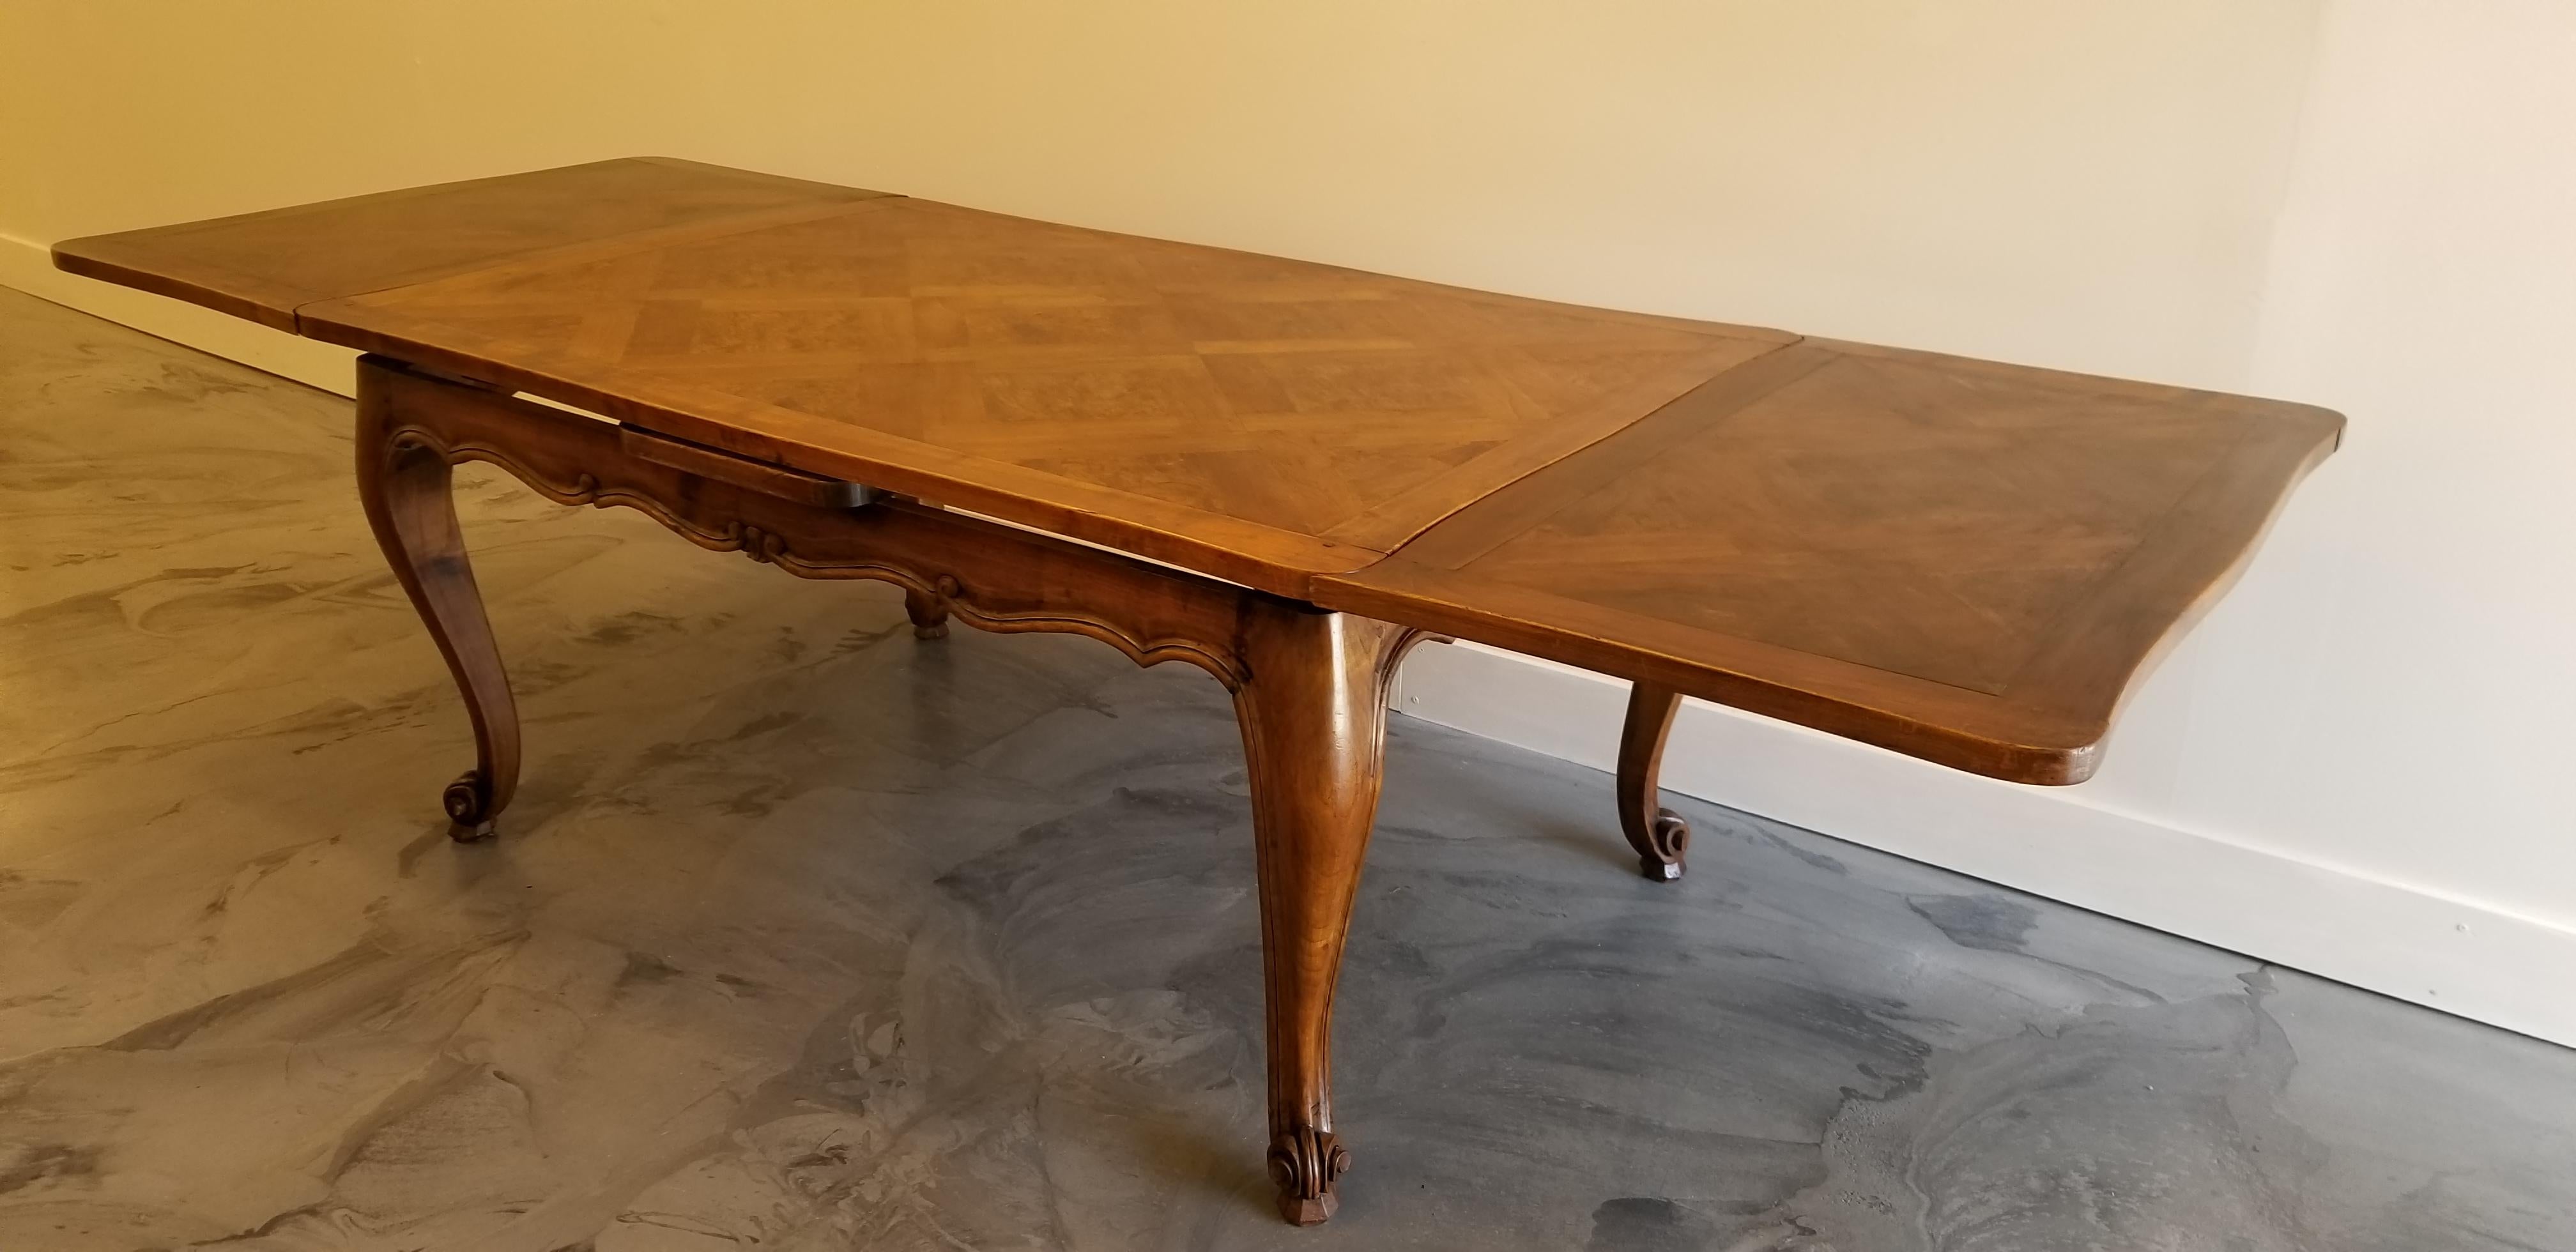 Early 20th Century French Provincial Draw-Leaf Dining Table For Sale 1